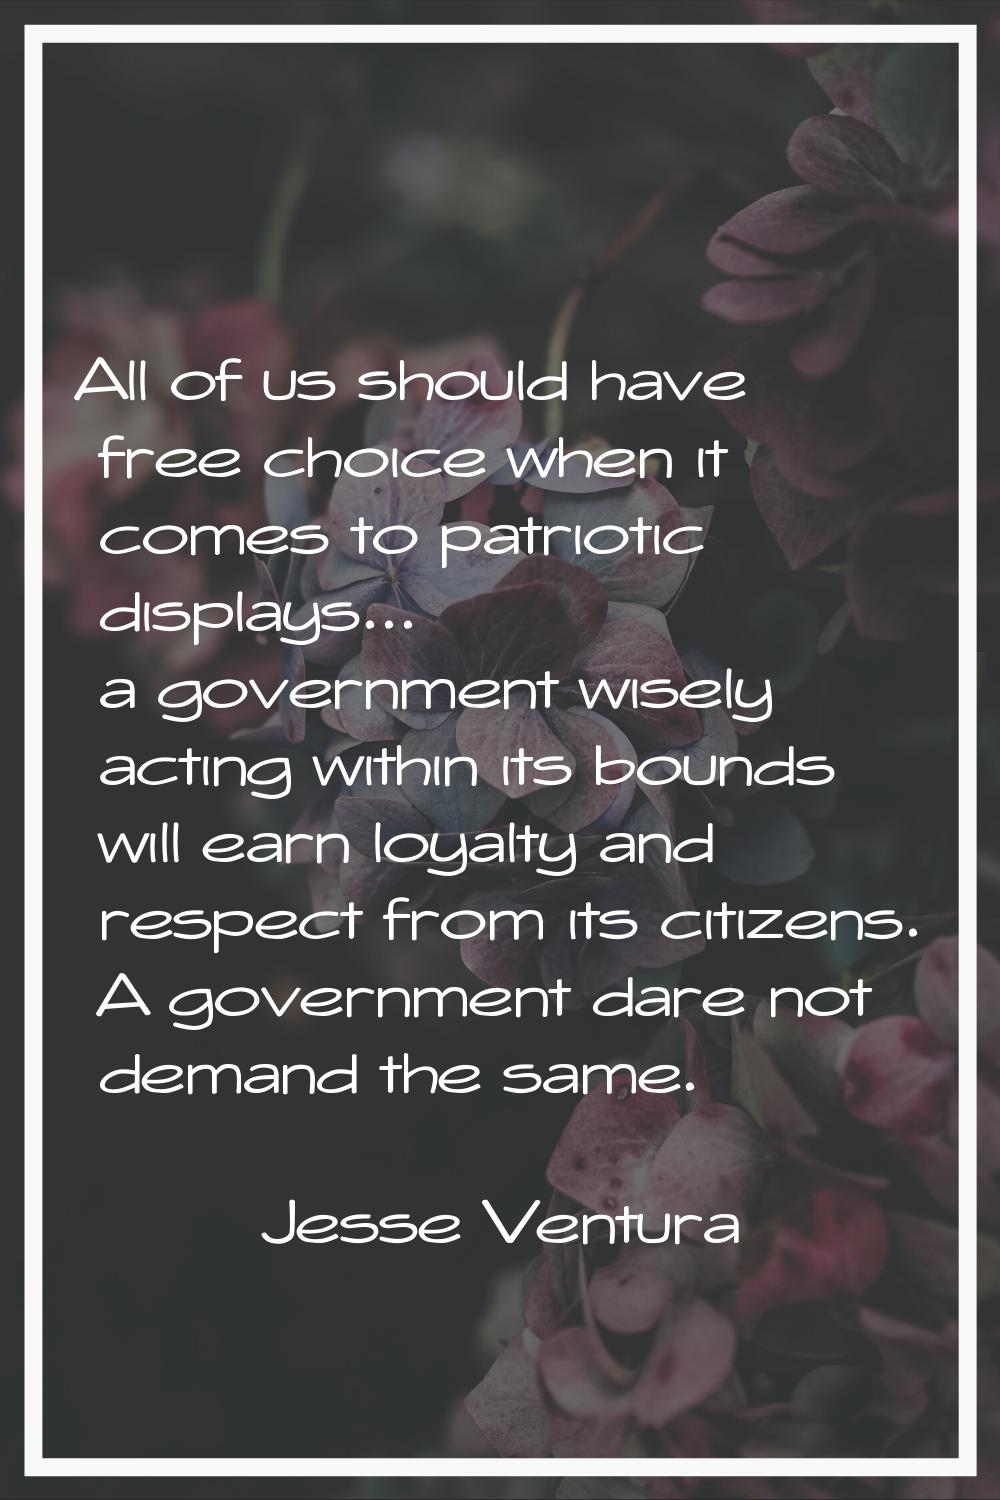 All of us should have free choice when it comes to patriotic displays... a government wisely acting